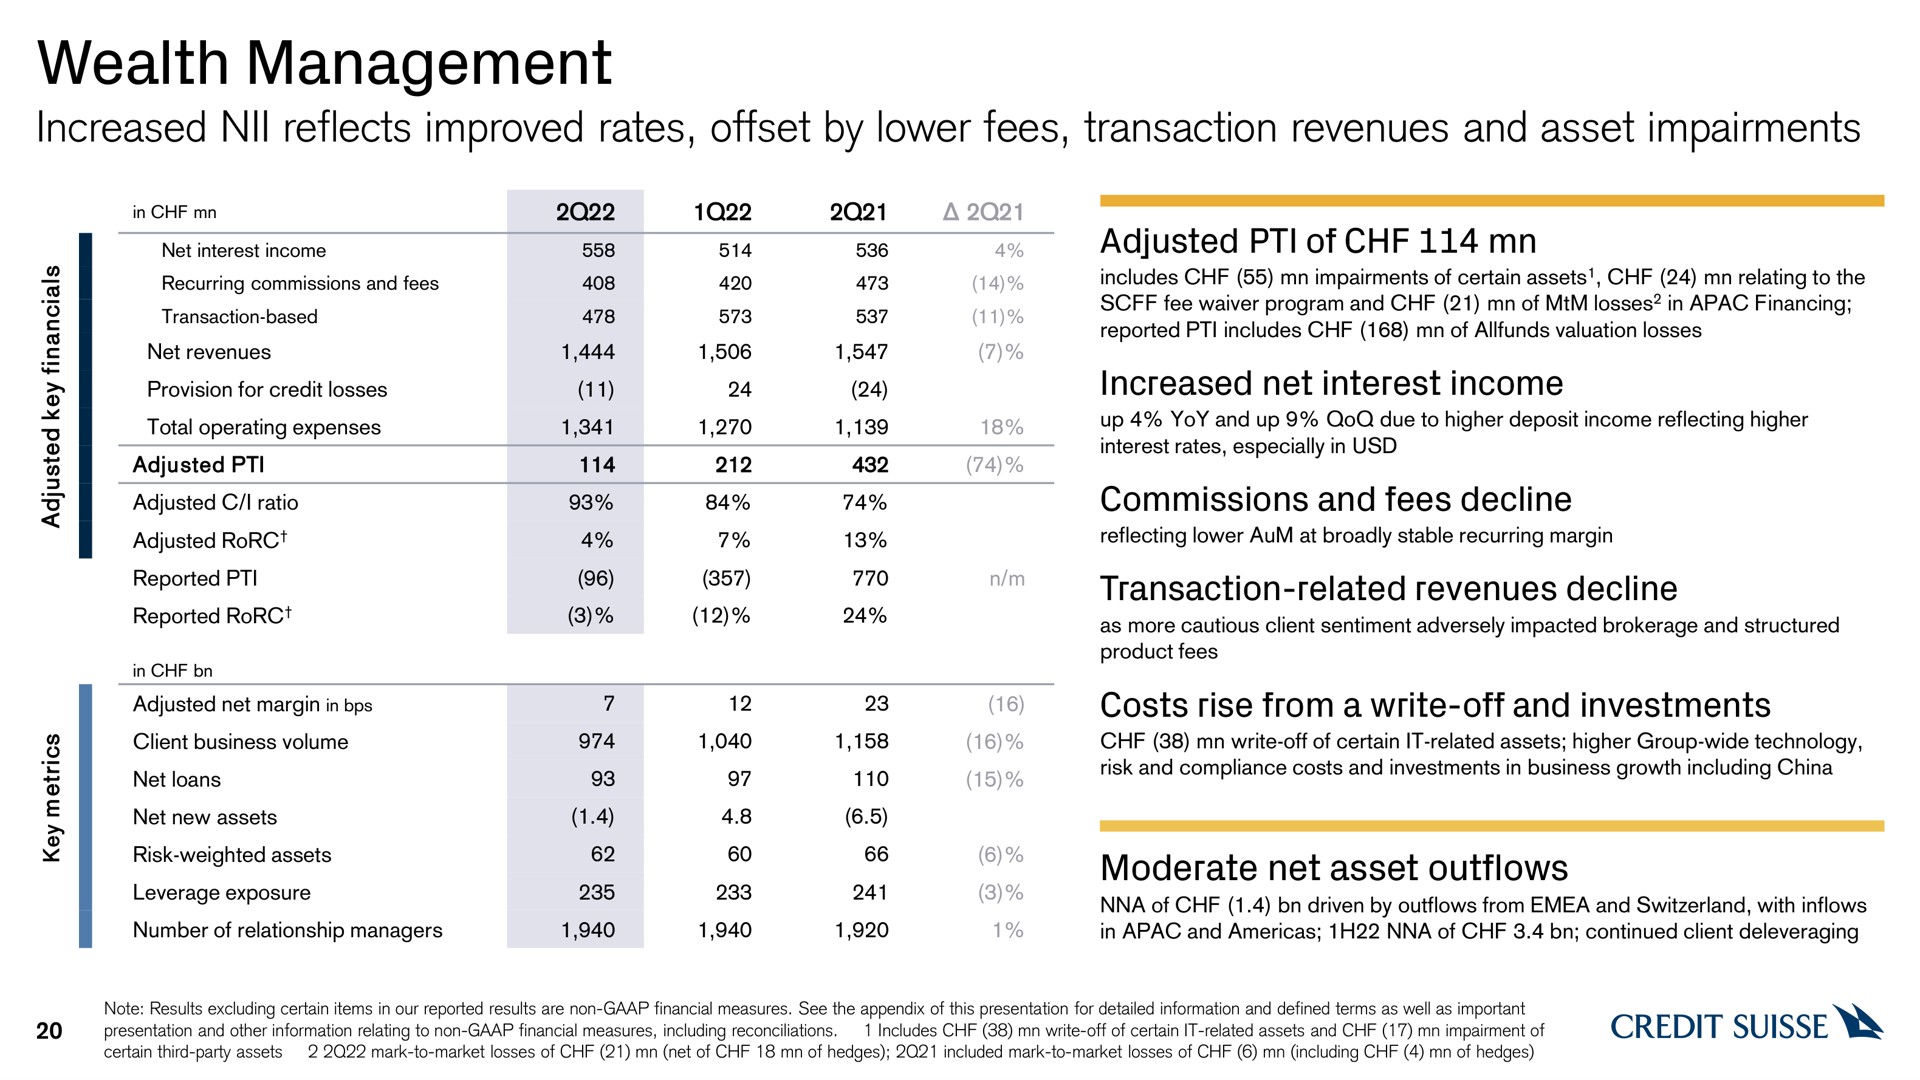 wealth management increased reflects improved rates offset by lower fees transaction revenues and asset impairments moderate net asset outflows credit | Credit Suisse